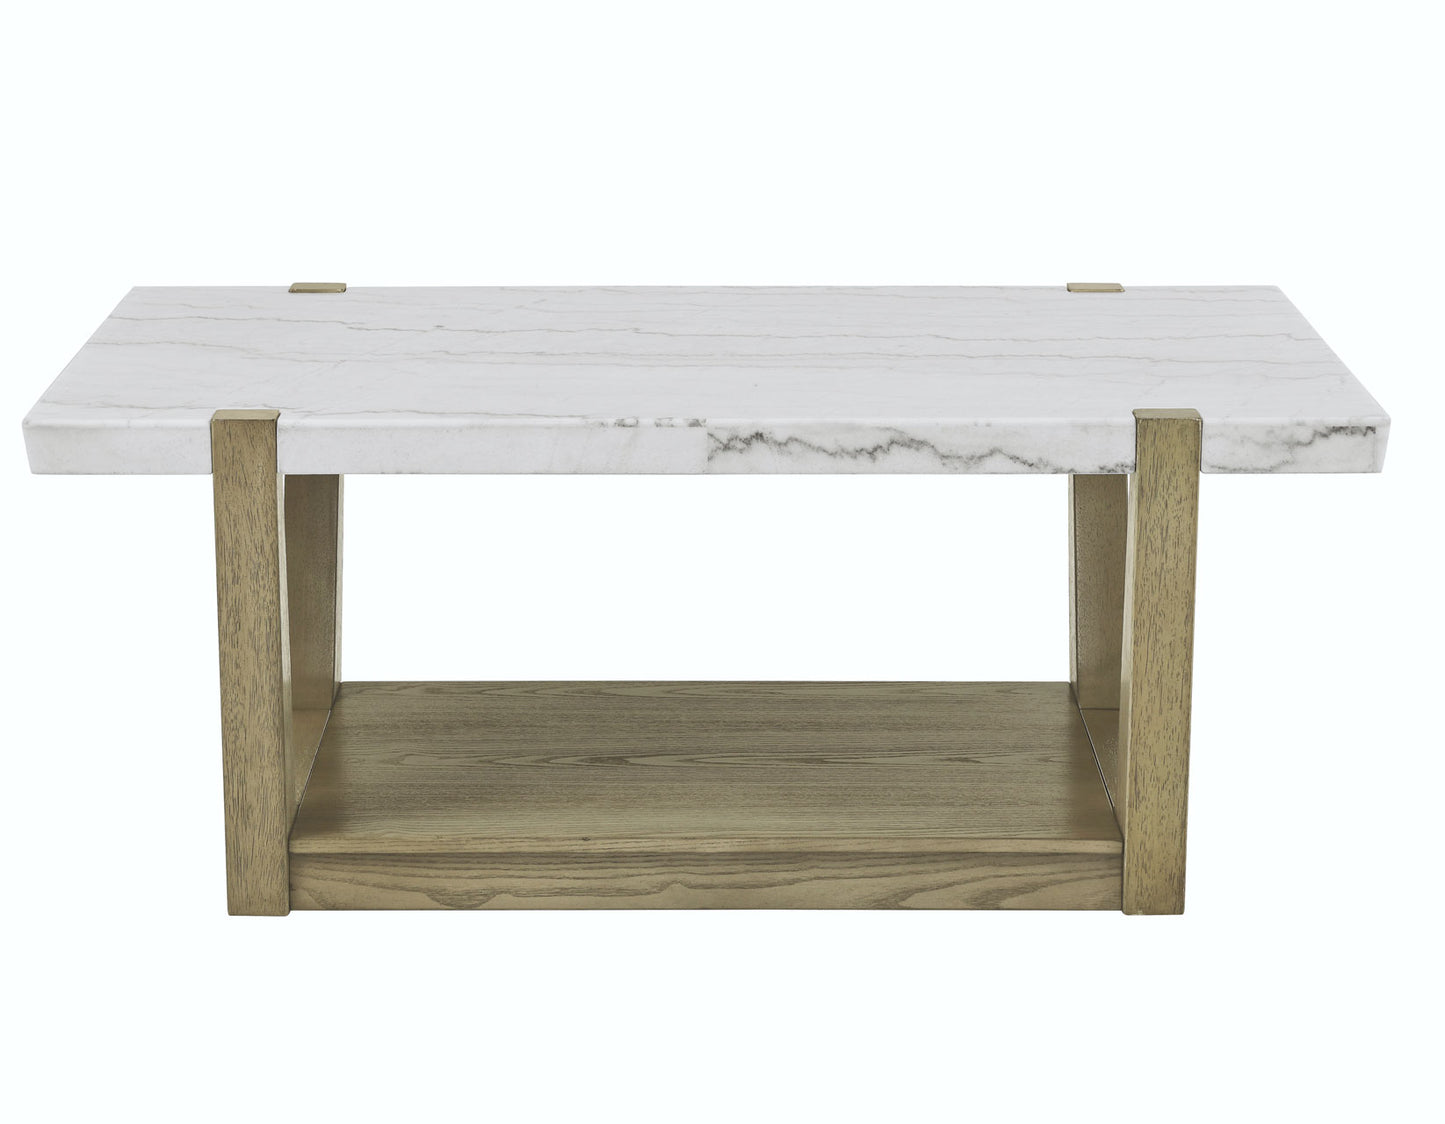 Perth White Marble Top Cocktail Table with Casters